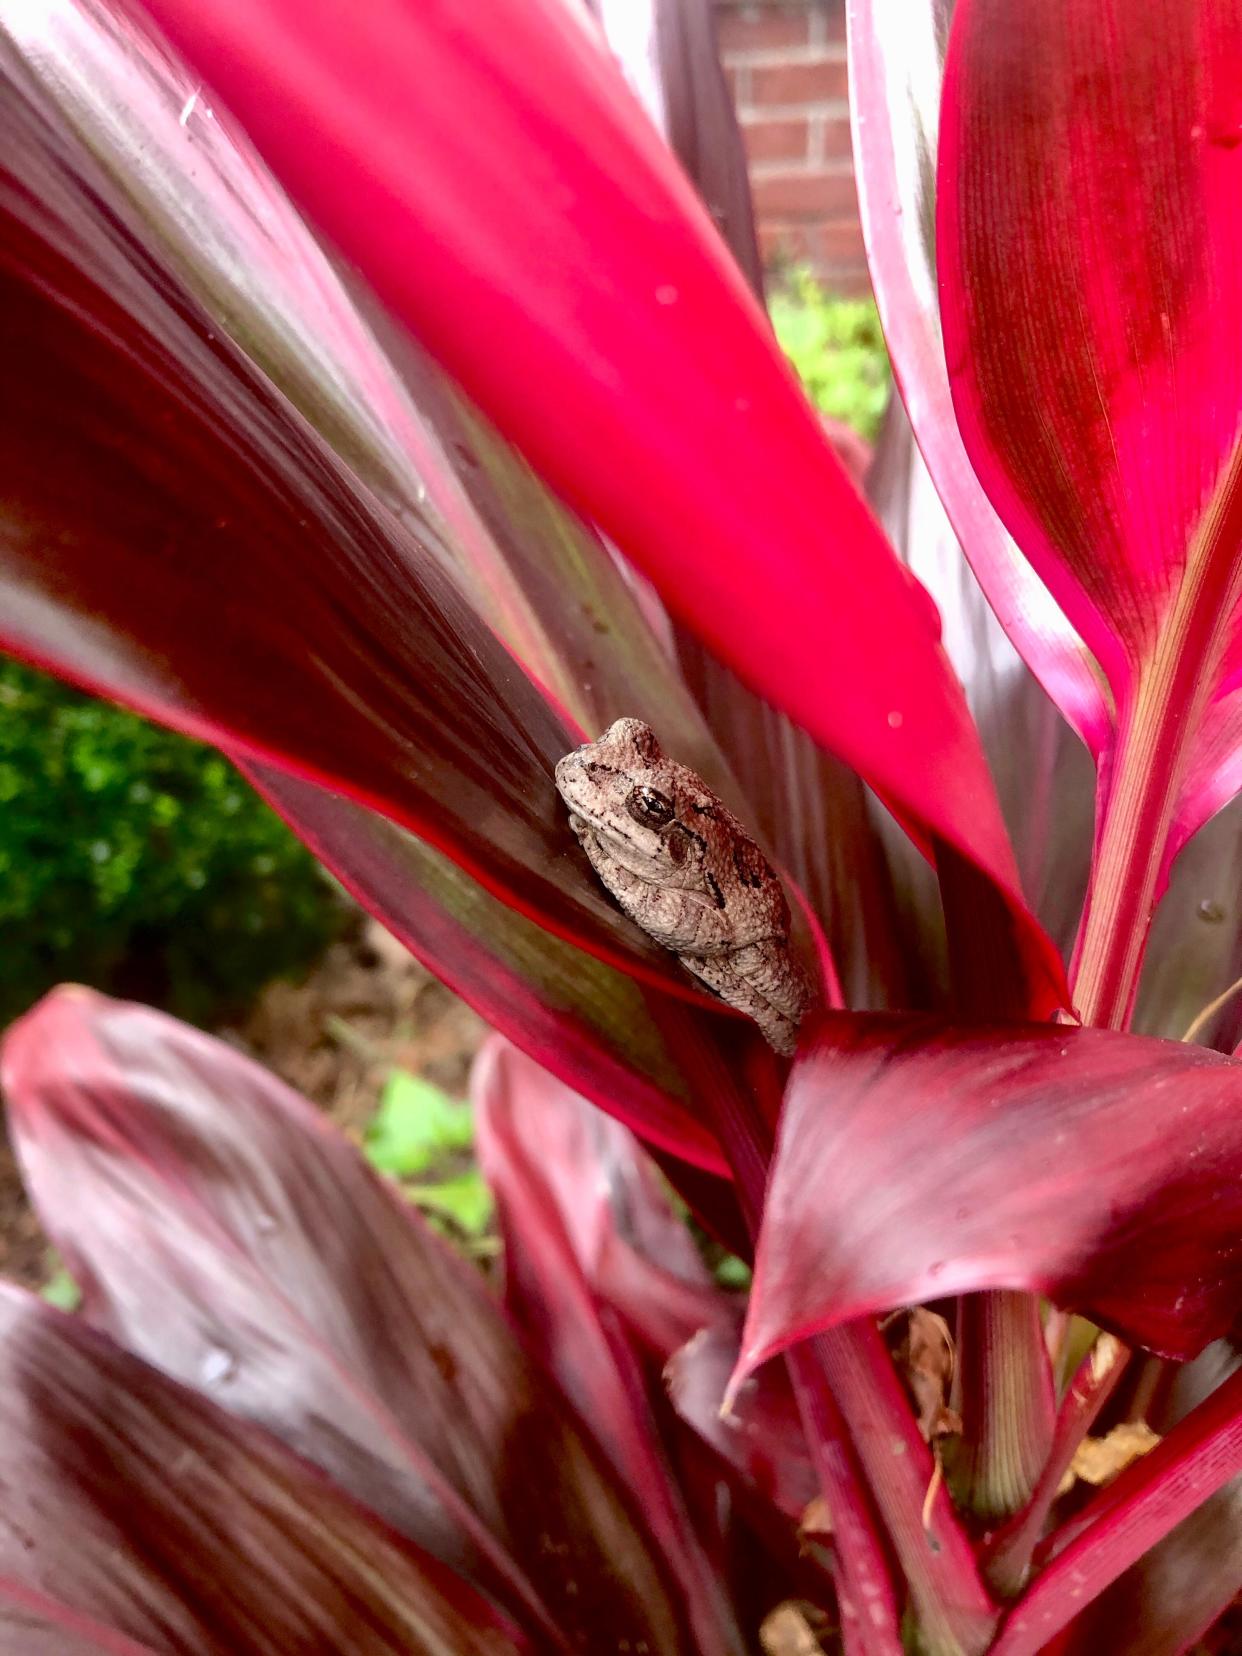 This Gray Tree Frog adds his persona in The Garden Guy’s Hawaiian Ti as he nestles in the tropical red foliage.